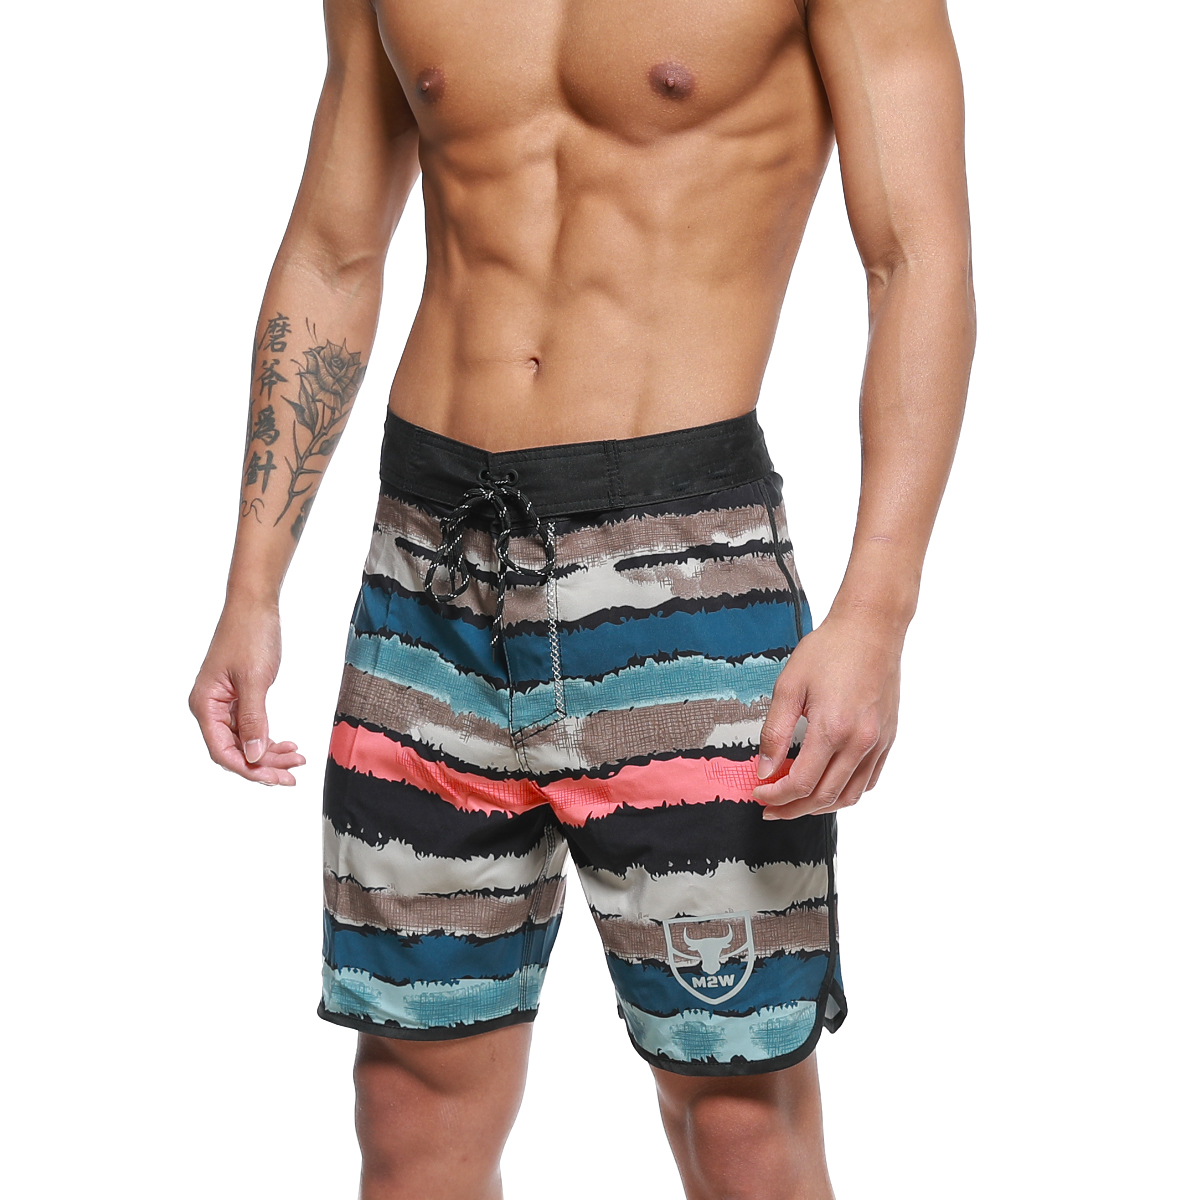 [MetroMuscleWear] Tiger Physique Board Short (4716-70)